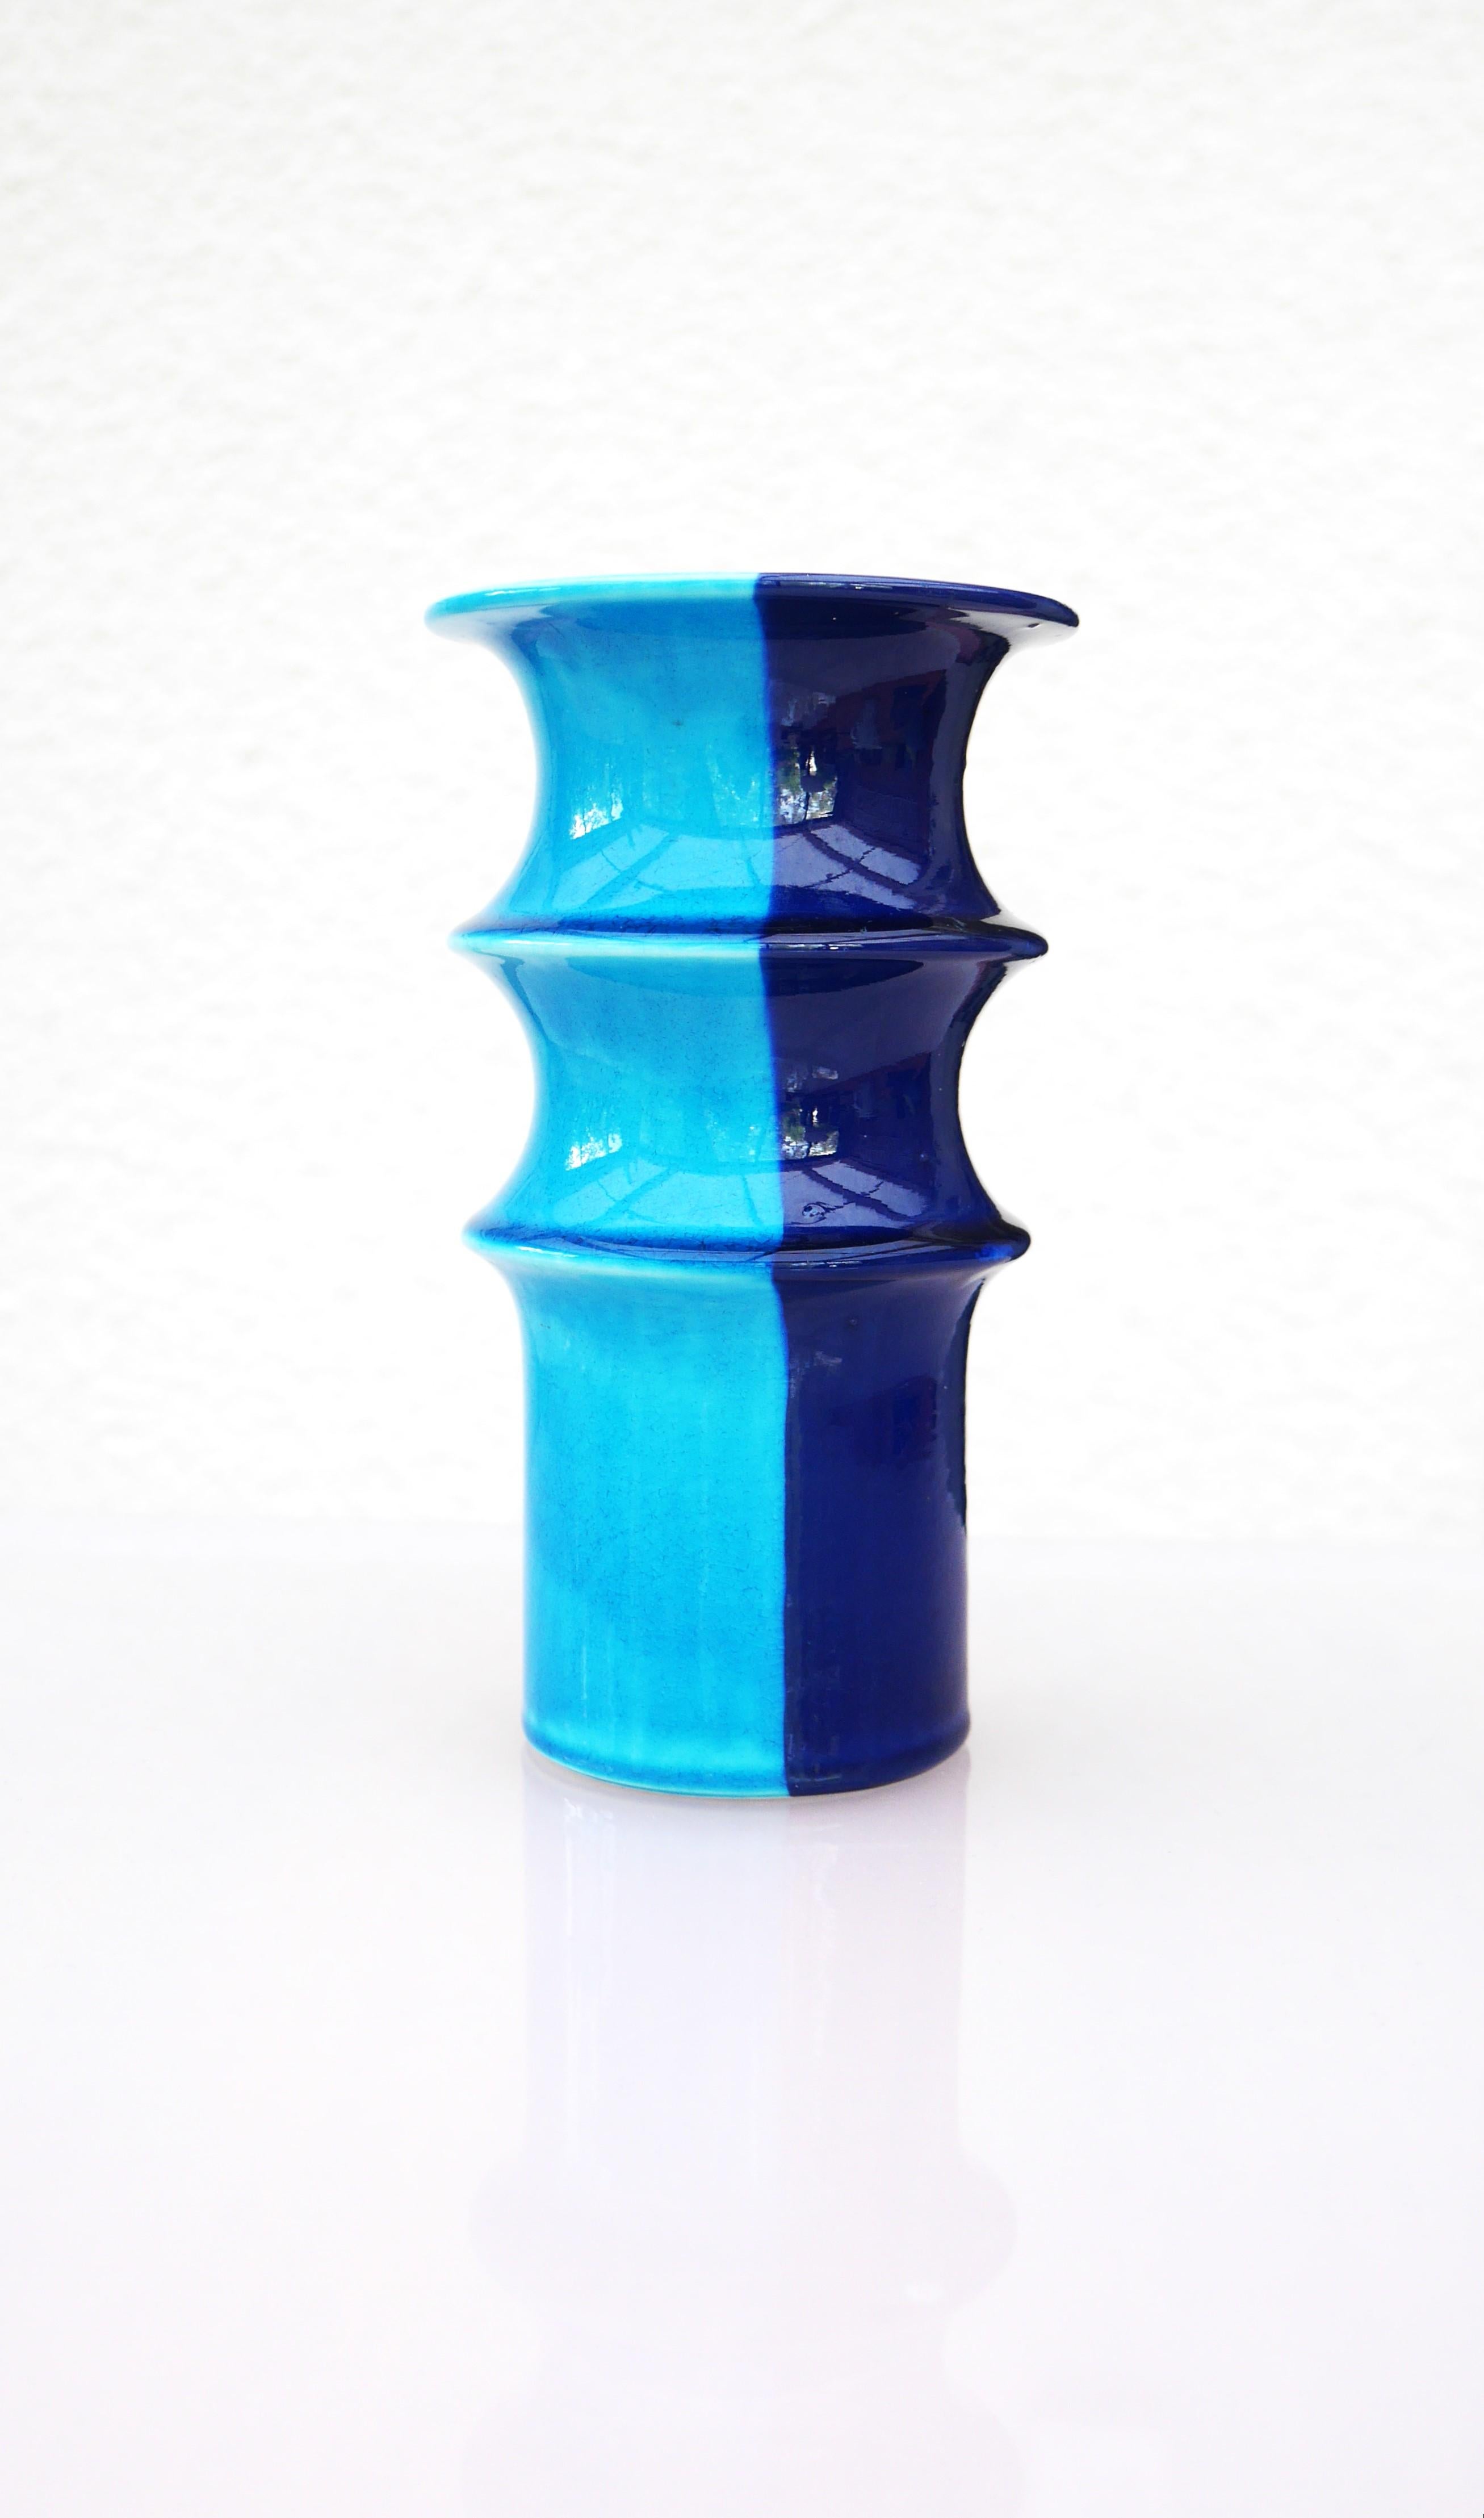 A signed pop art ceramic vase known as 